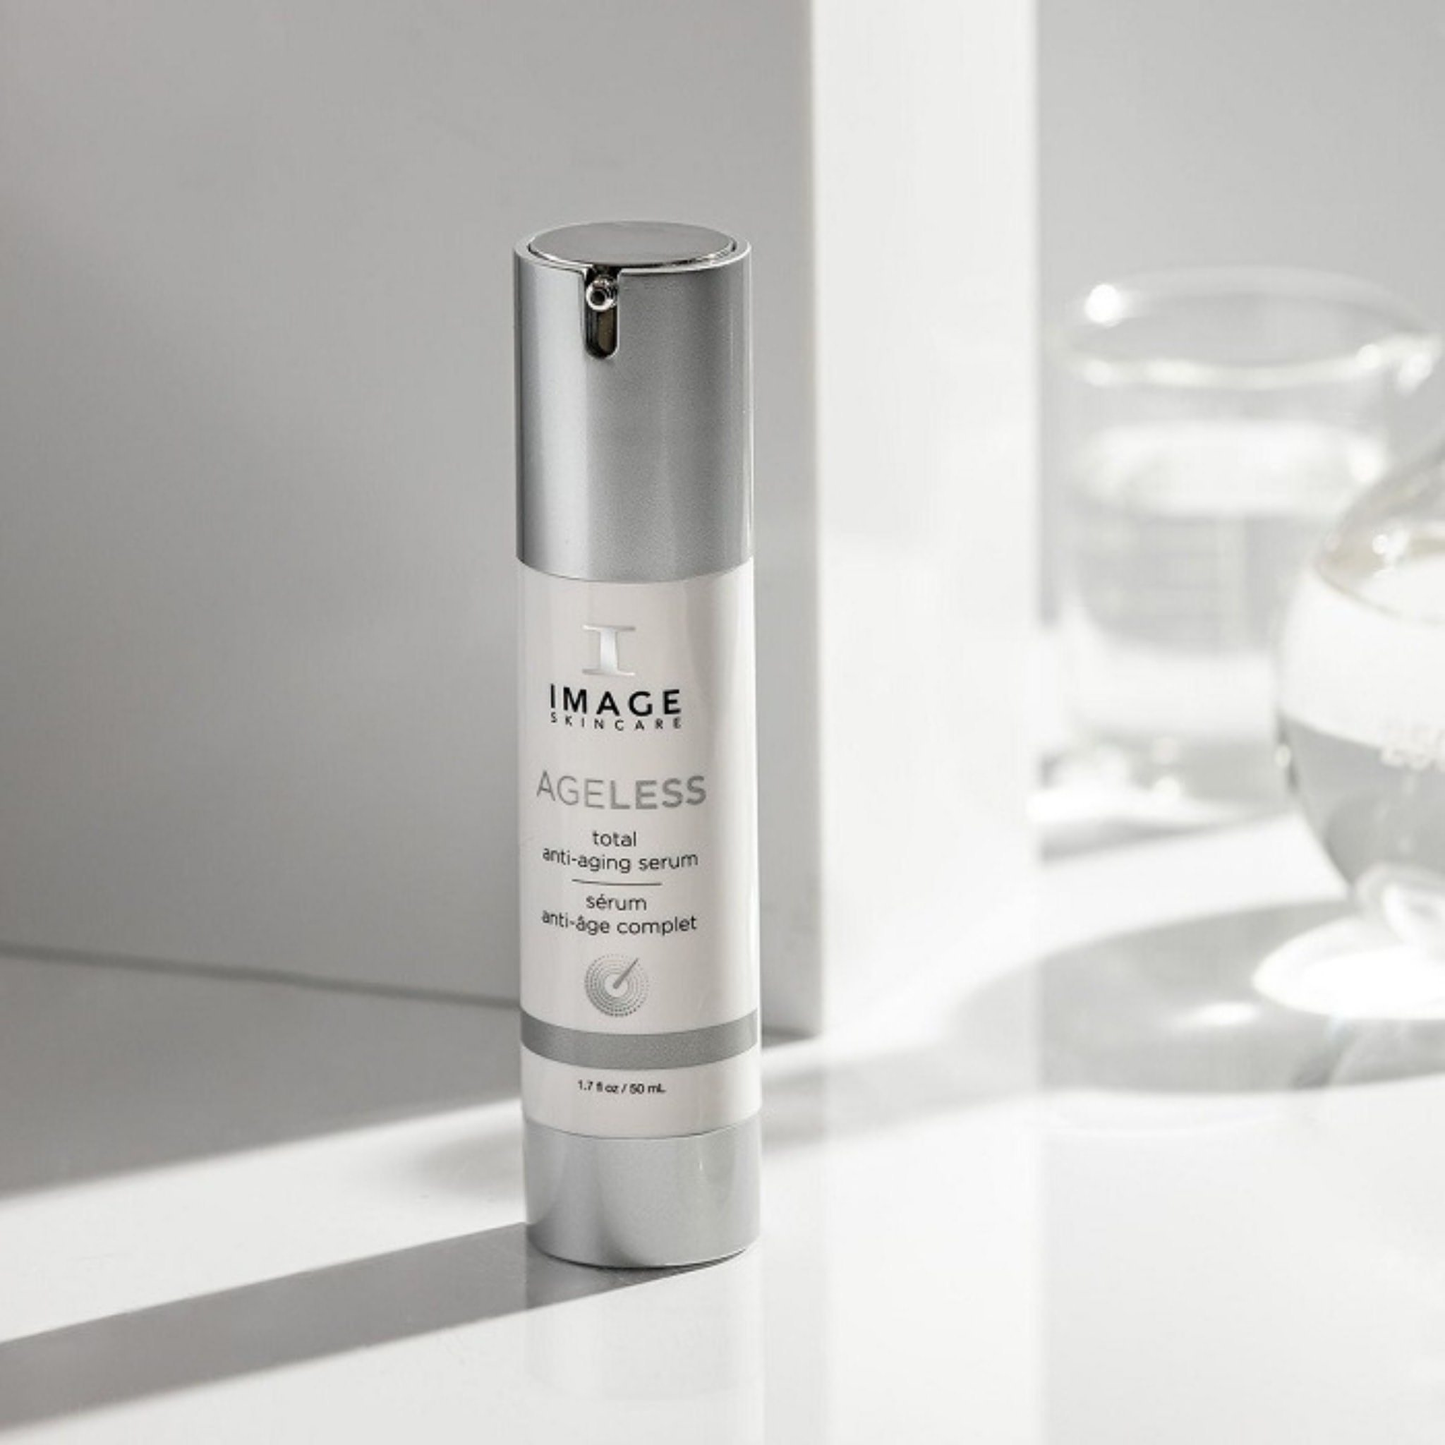 This multi-benefit peptide and AHA serum addresses key aging concerns, including the appearance of wrinkles, uneven tone, lack of firmness, and dry skin. 